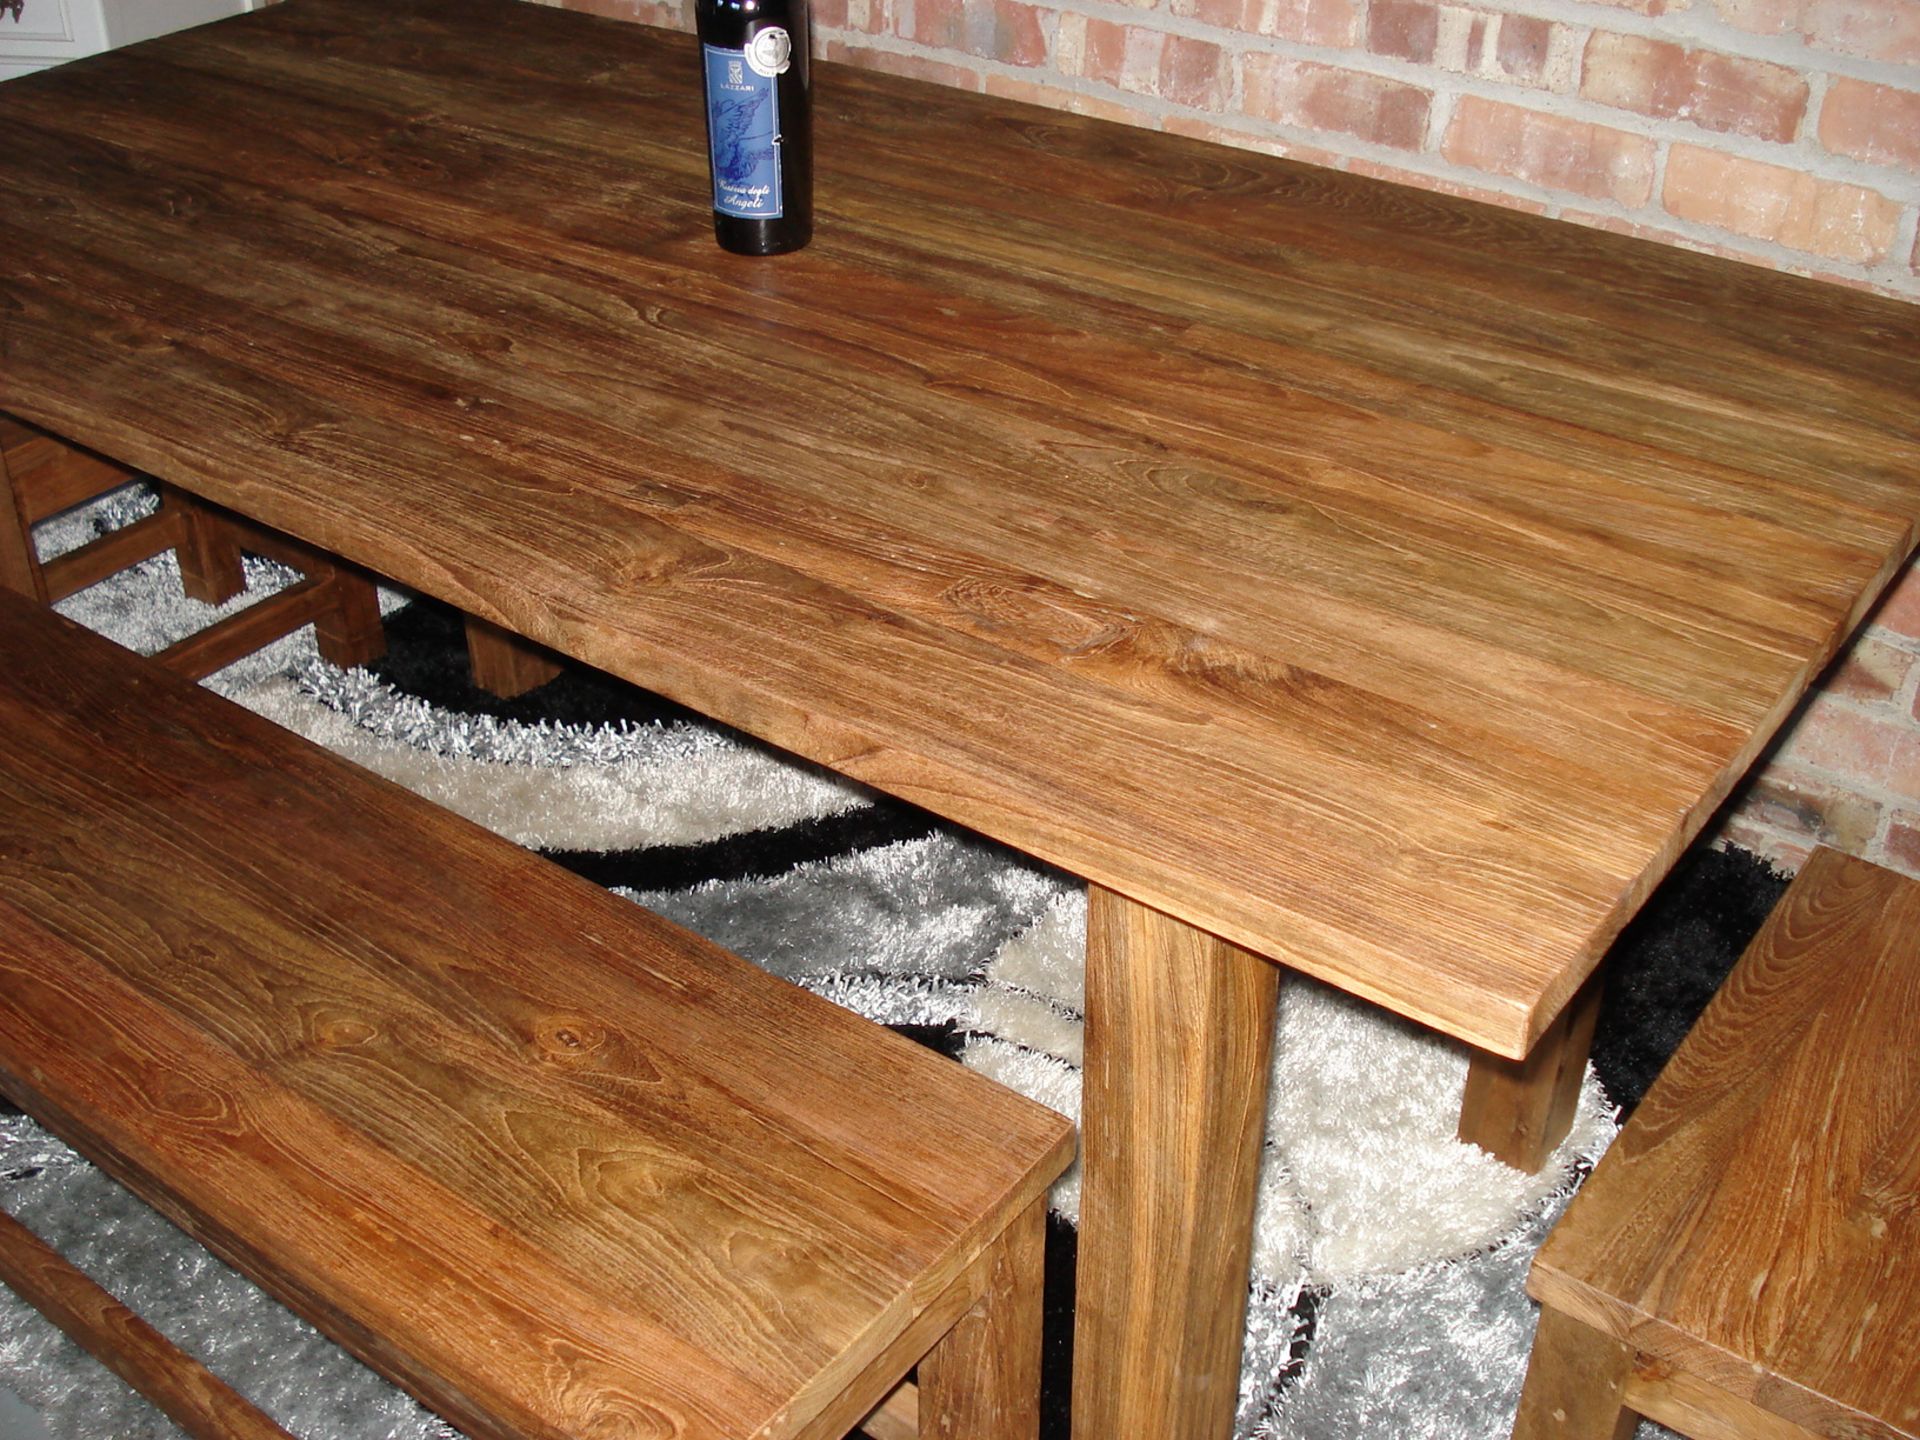 NEW CONTEMPORARY QUALITY PACKAGED SOLID TEAK DINING TABLE, 2 MATCHING BENCHES & 2 STOOLS - Image 2 of 4